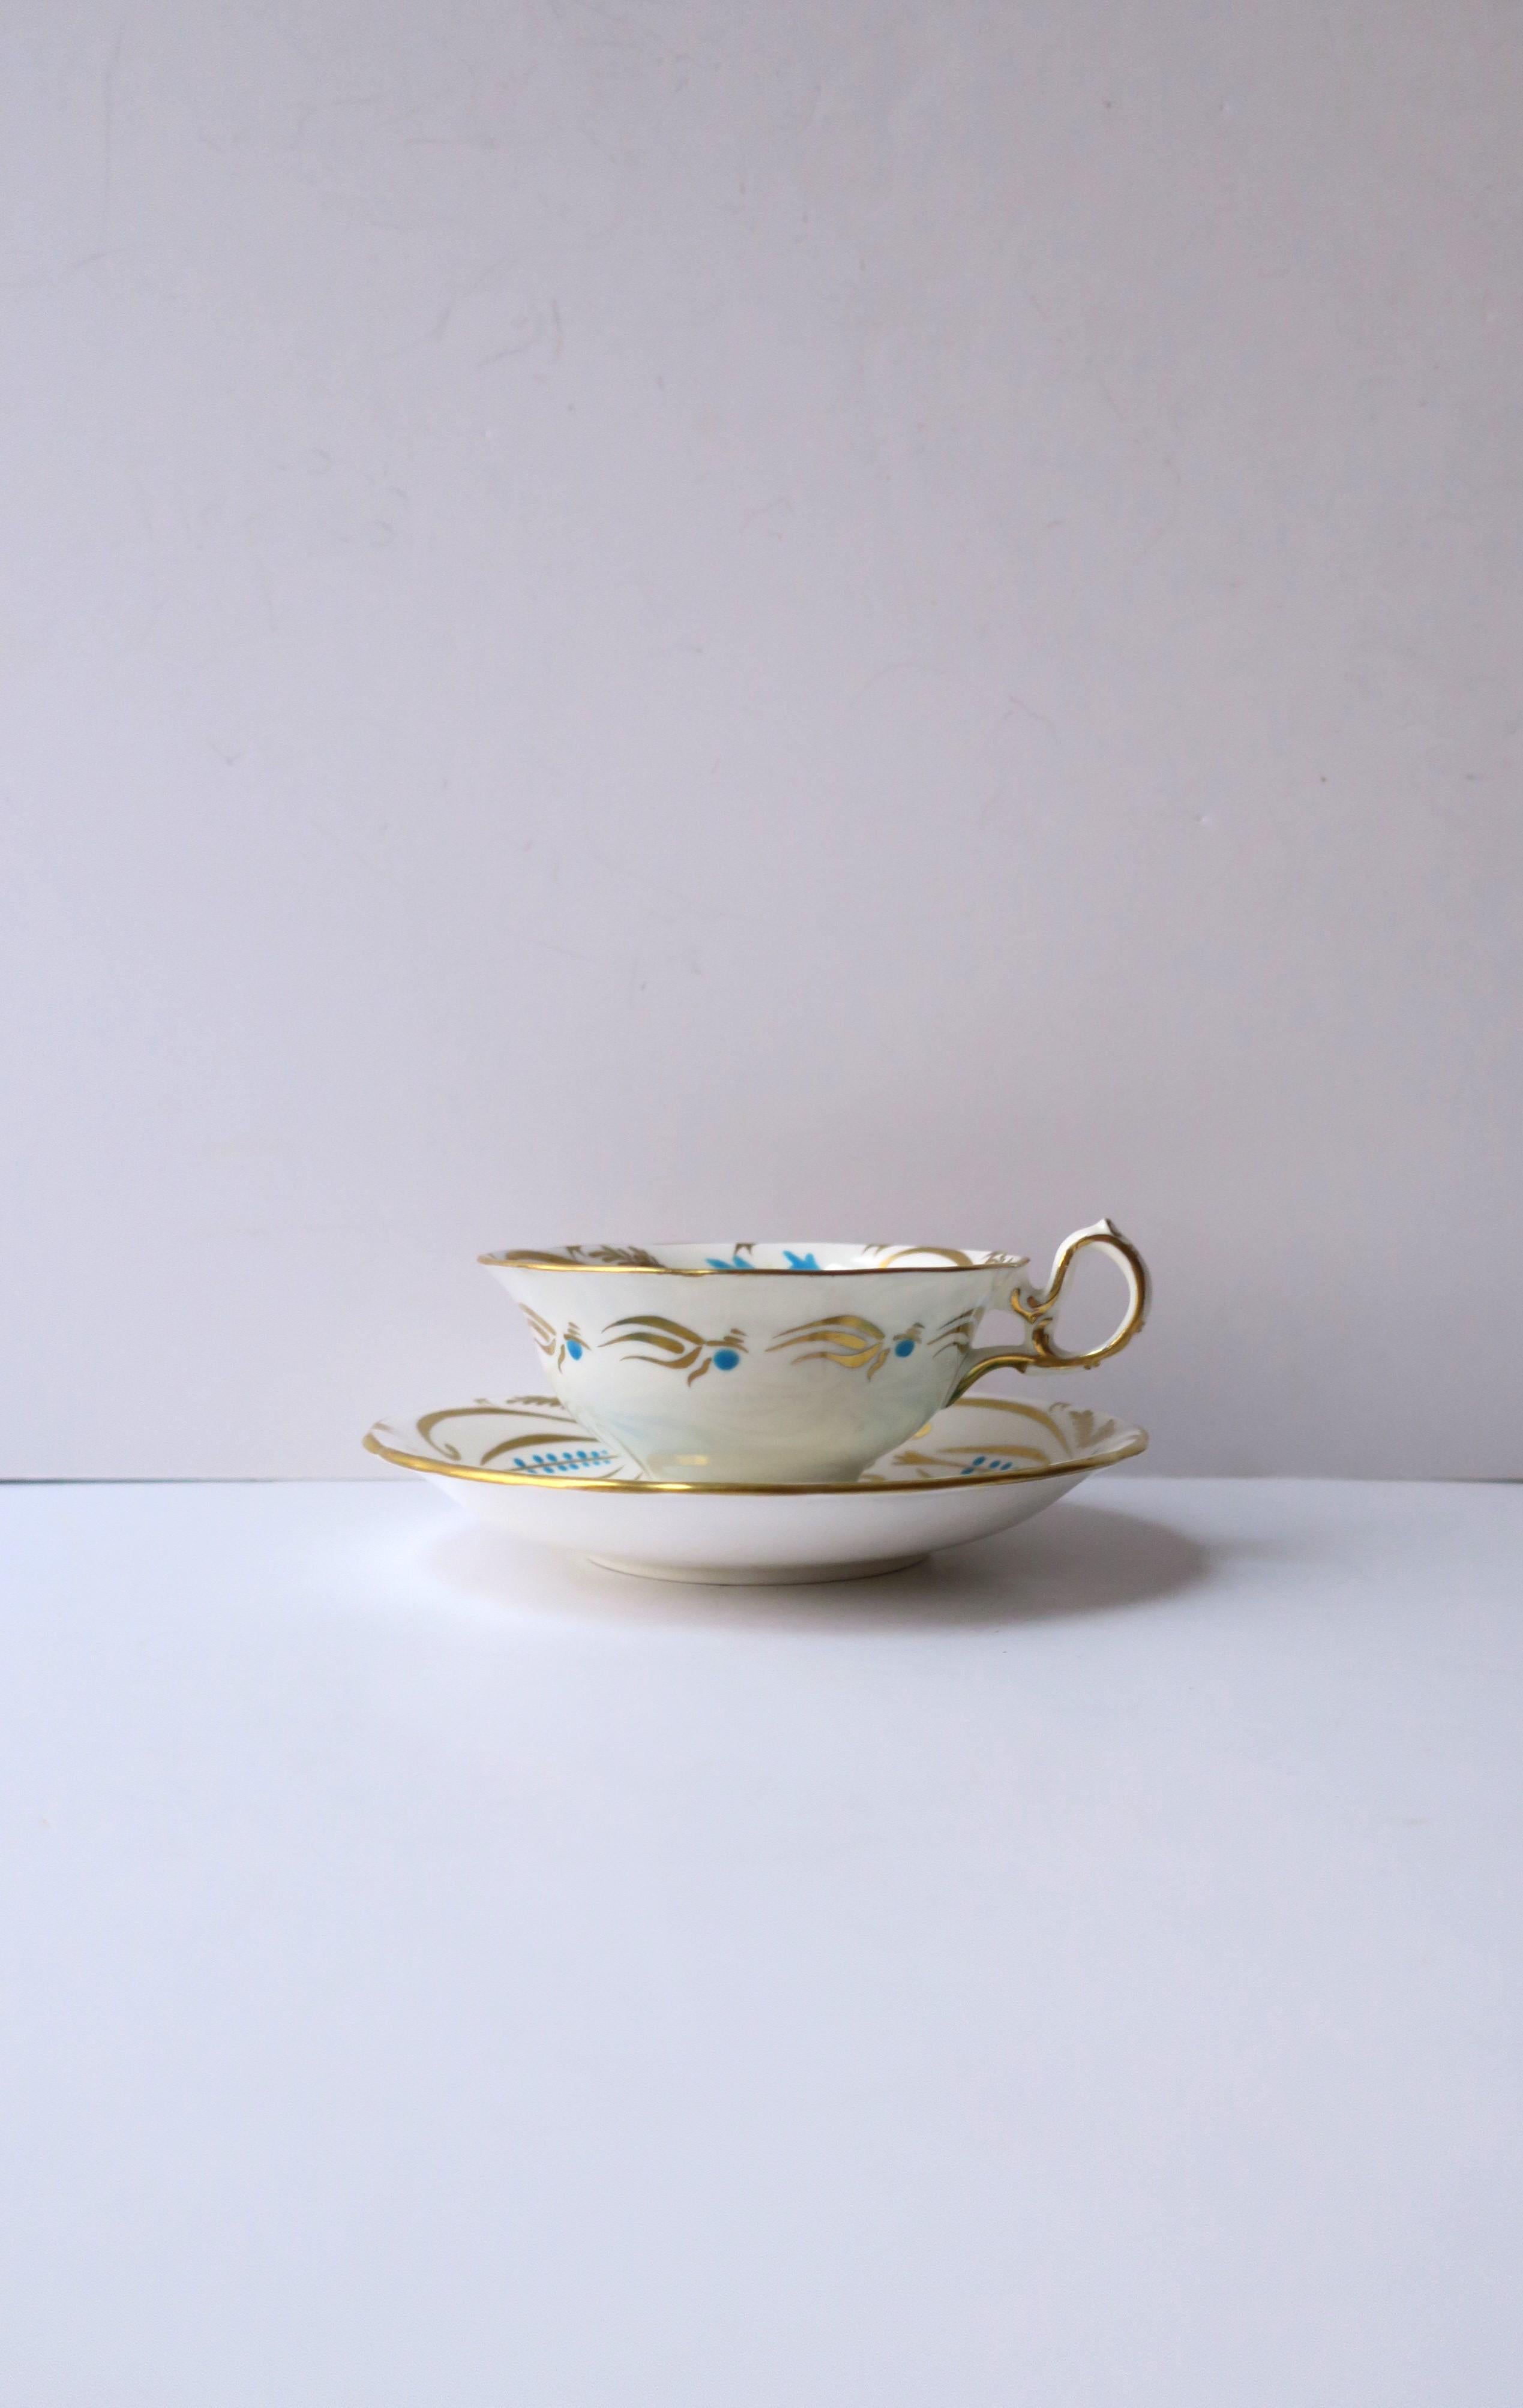 20th Century Royal Chelsea Porcelain Coffee or Tea Cup and Saucer with Bird Design For Sale